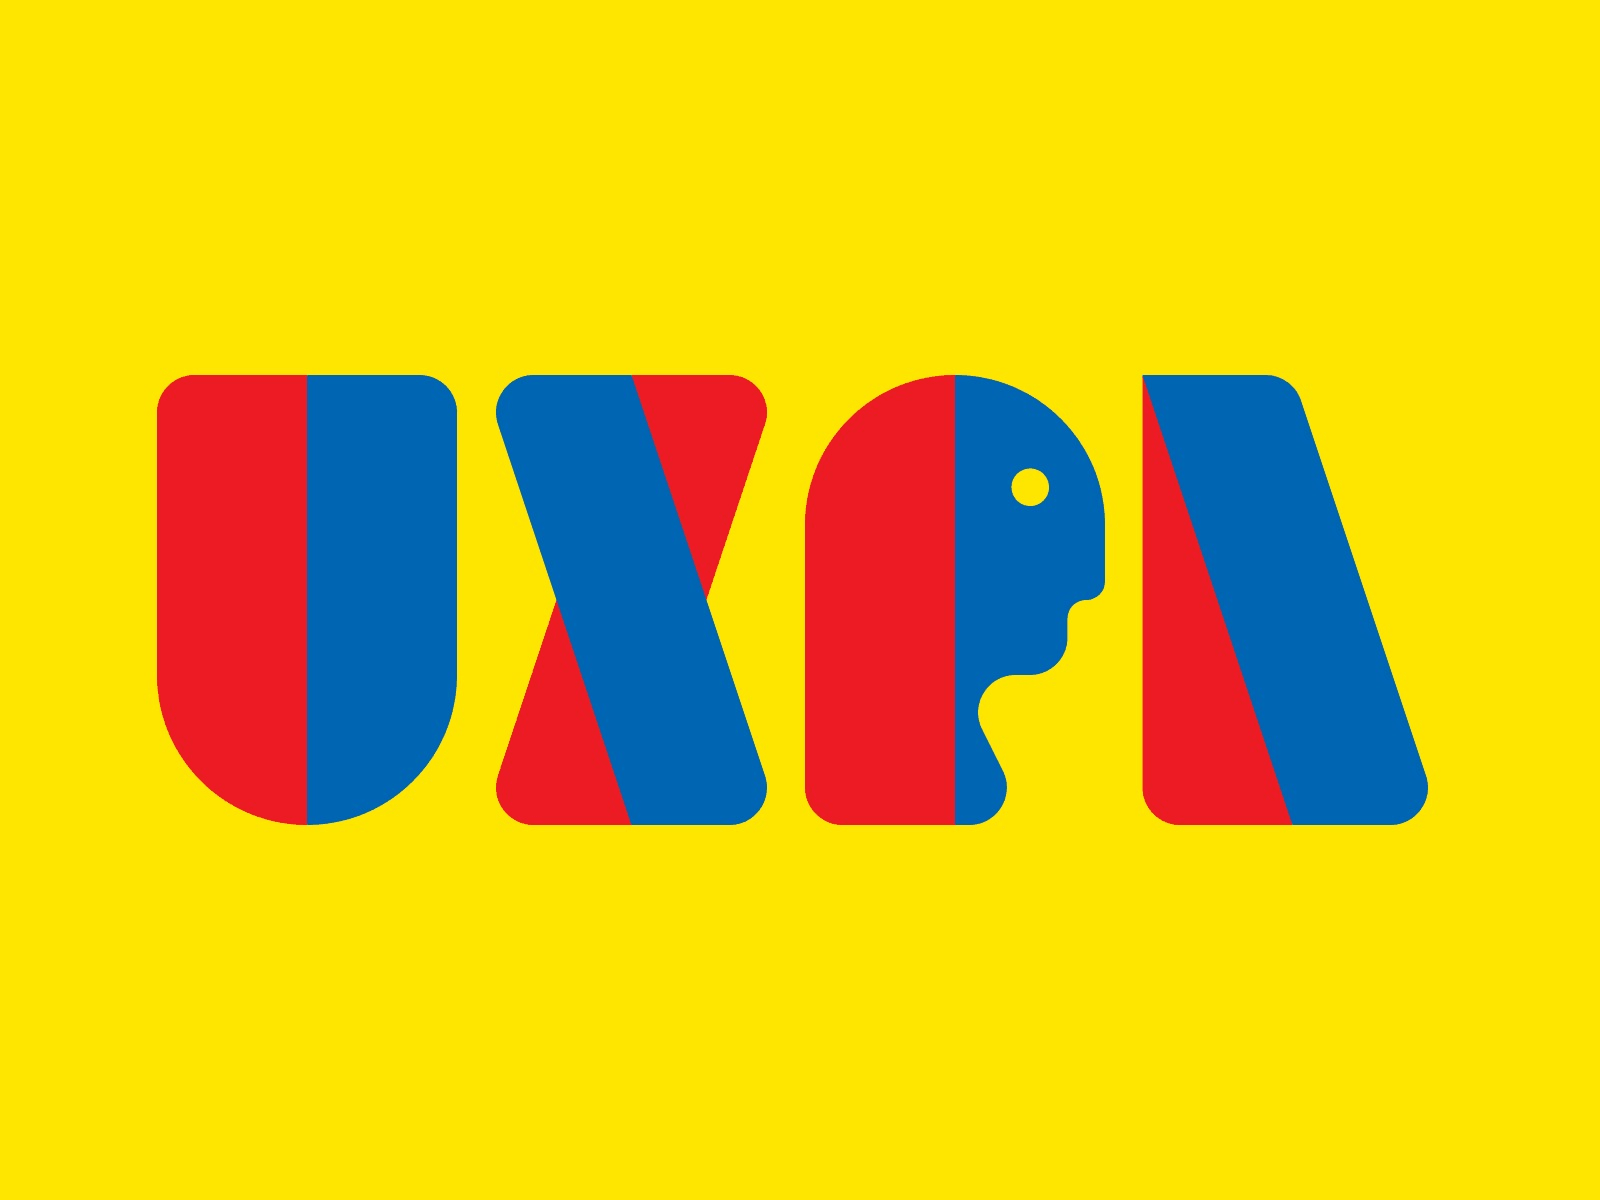 UXPA Boston 2020 (Unofficial) by Craig Butterworth on Dribbble